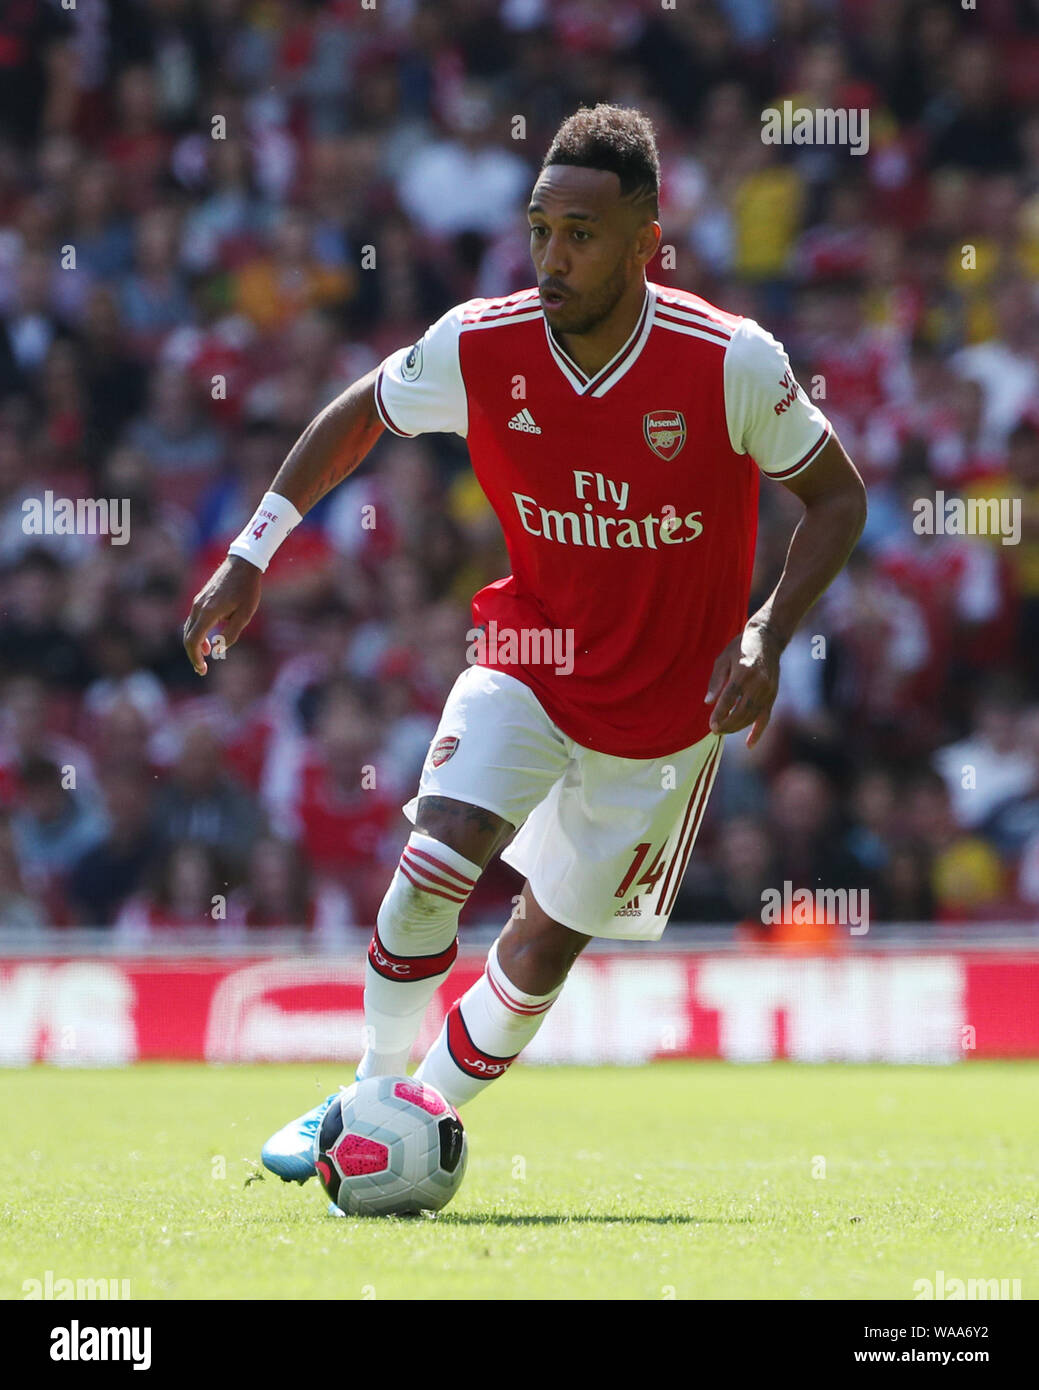 Arsenal's Pierre-Emerick Aubameyang during the Premier League match at the Emirates Stadium, London. PRESS ASSOCIATION Photo. Picture date: Saturday August 17, 2018. Photo credit should read: Yui Mok/PA Wire. RESTRICTIONS: No use with unauthorised audio, video, data, fixture lists, club/league logos or "live" services. Online in-match use limited to 120 images, no video emulation. No use in betting, games or single club/league/player publications. Stock Photo